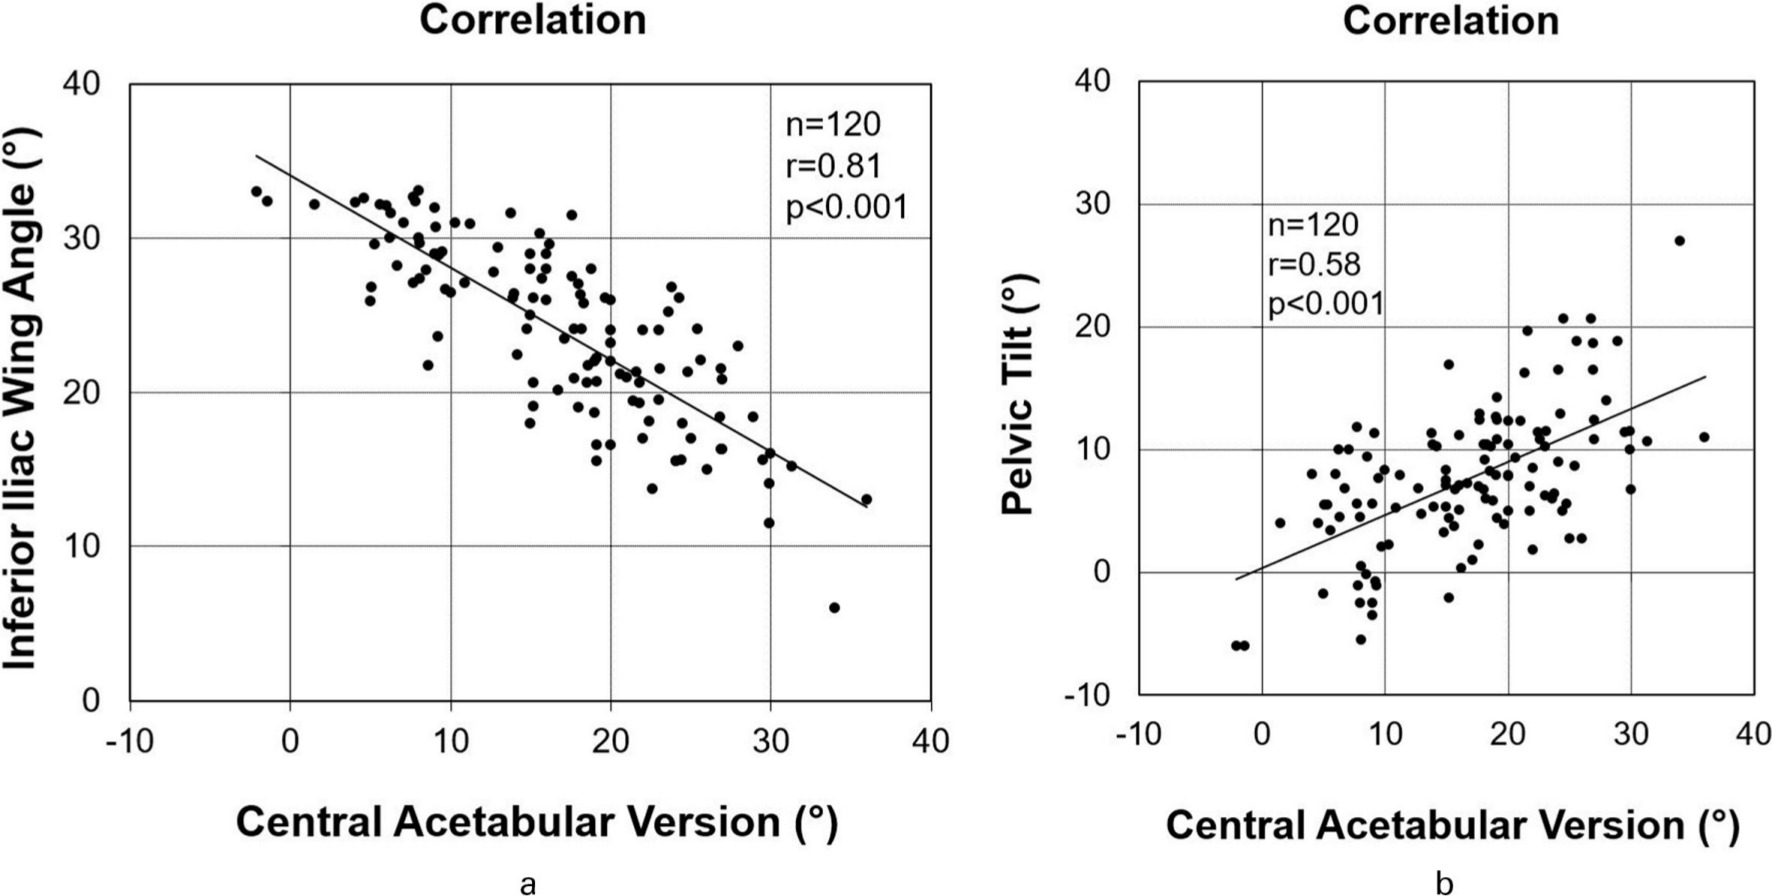 Fig. 5 
          a) Correlation between central acetabular version and the inferior iliac wing angle. b) Correlation between central acetabular version and pelvic tilt.
        